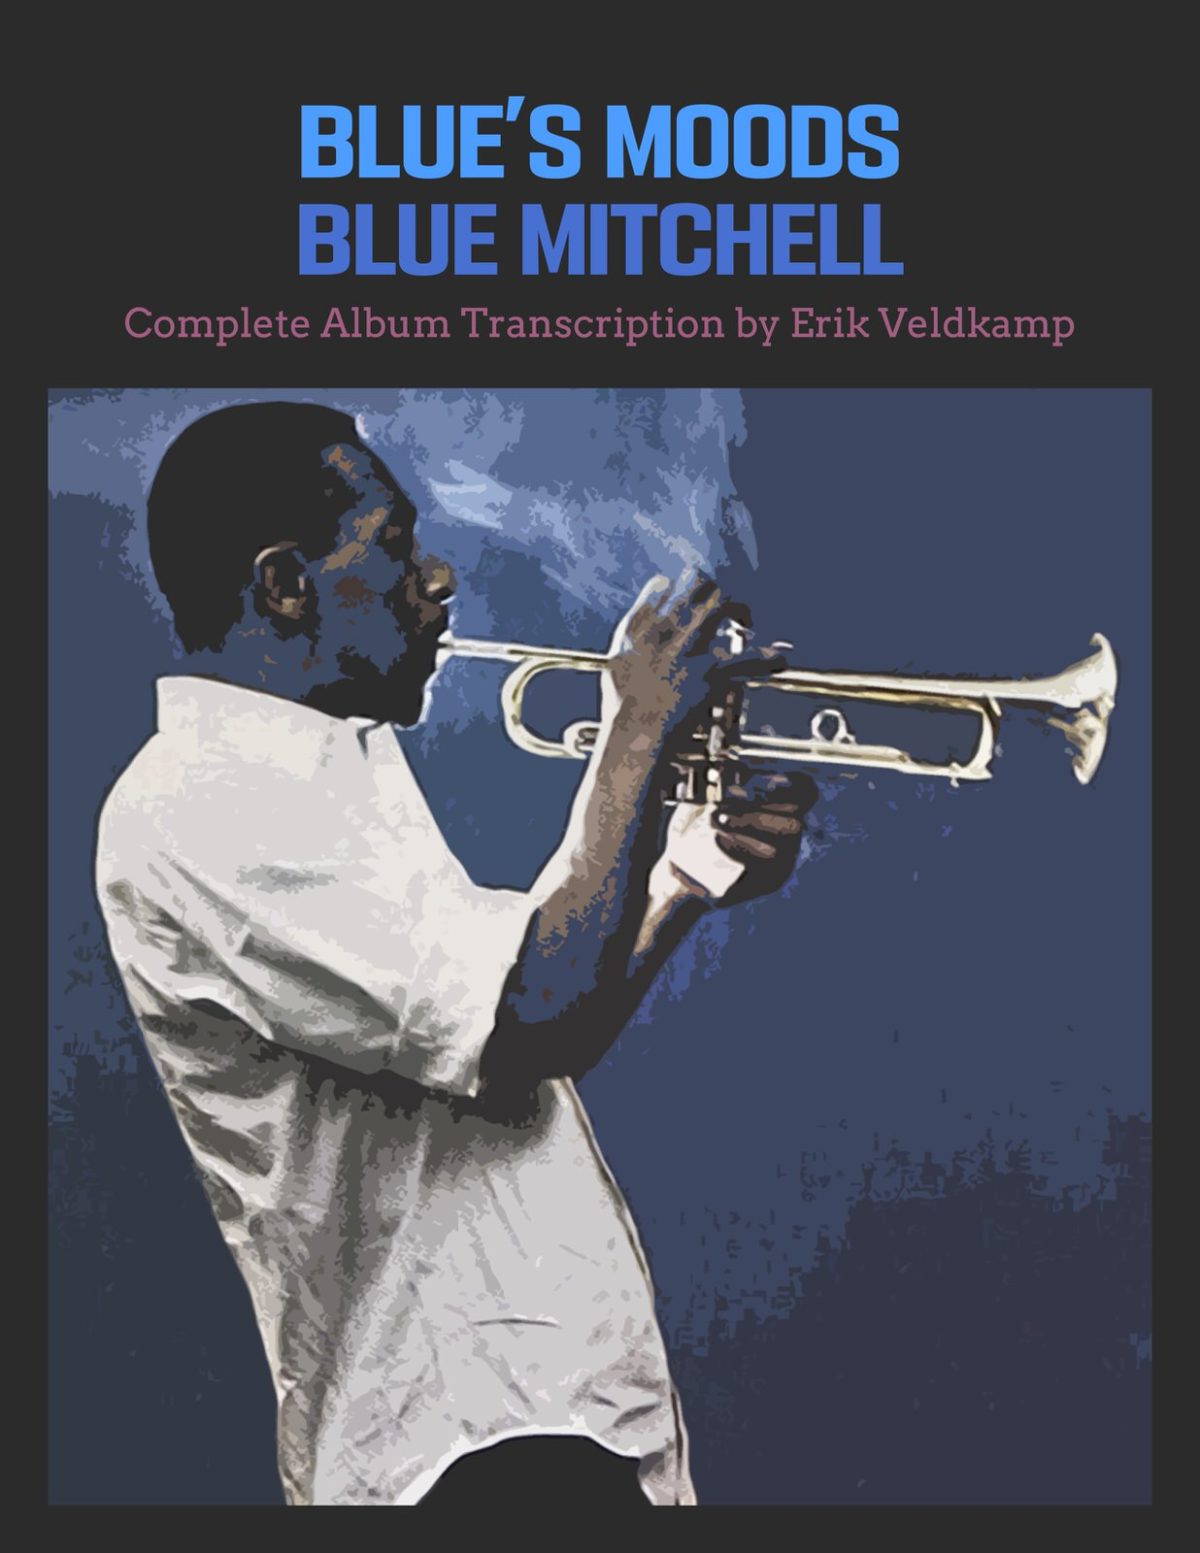 Complete Blue Mitchell